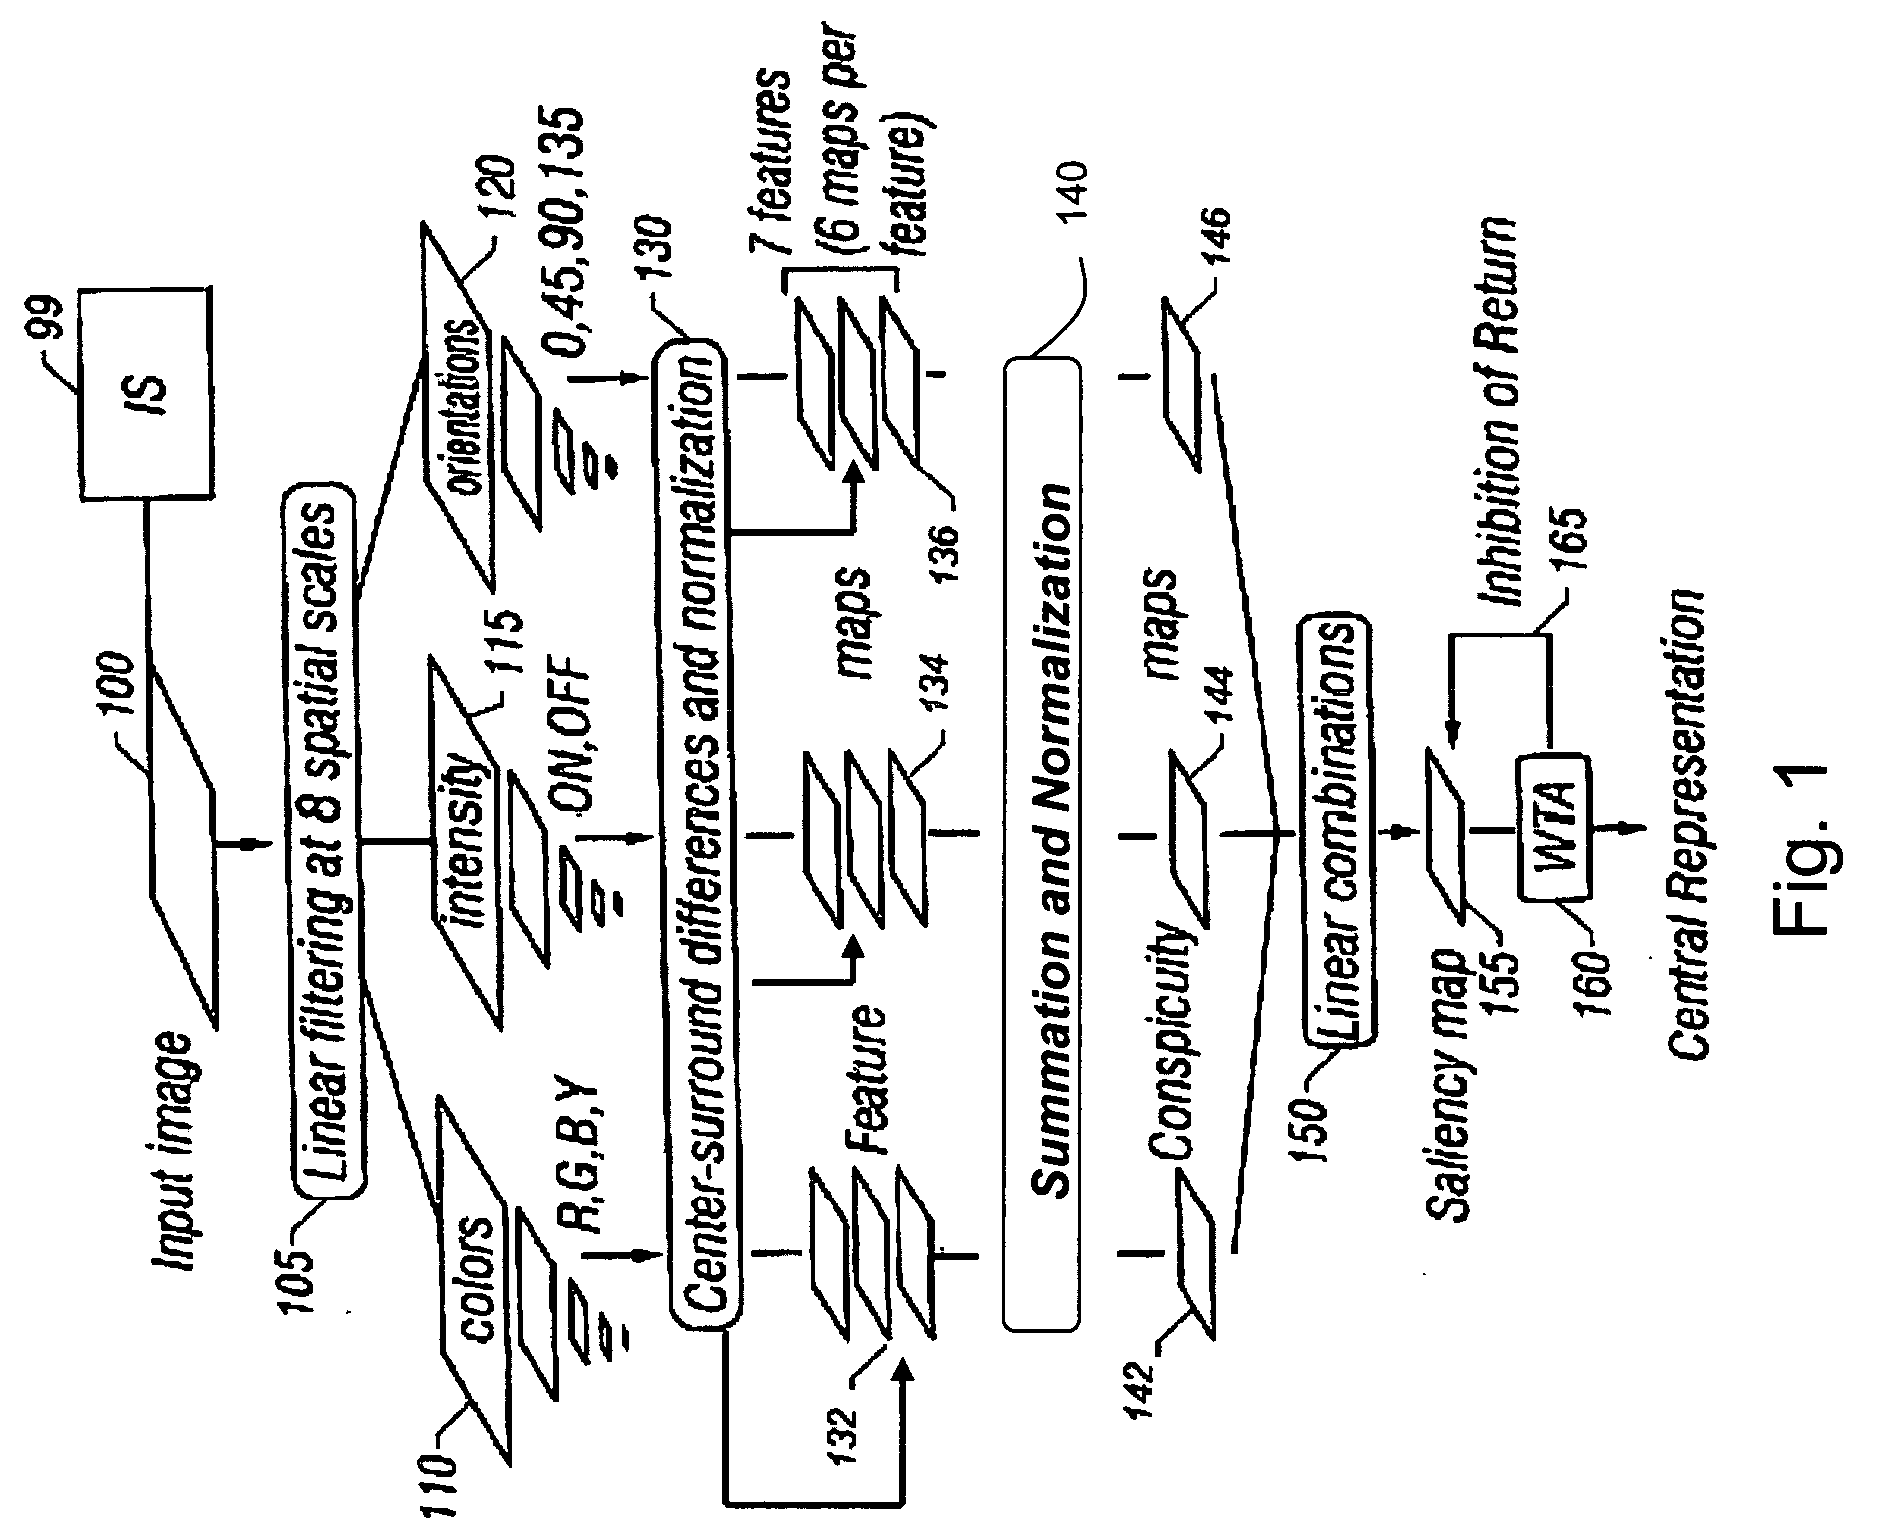 System and method for attentional selection